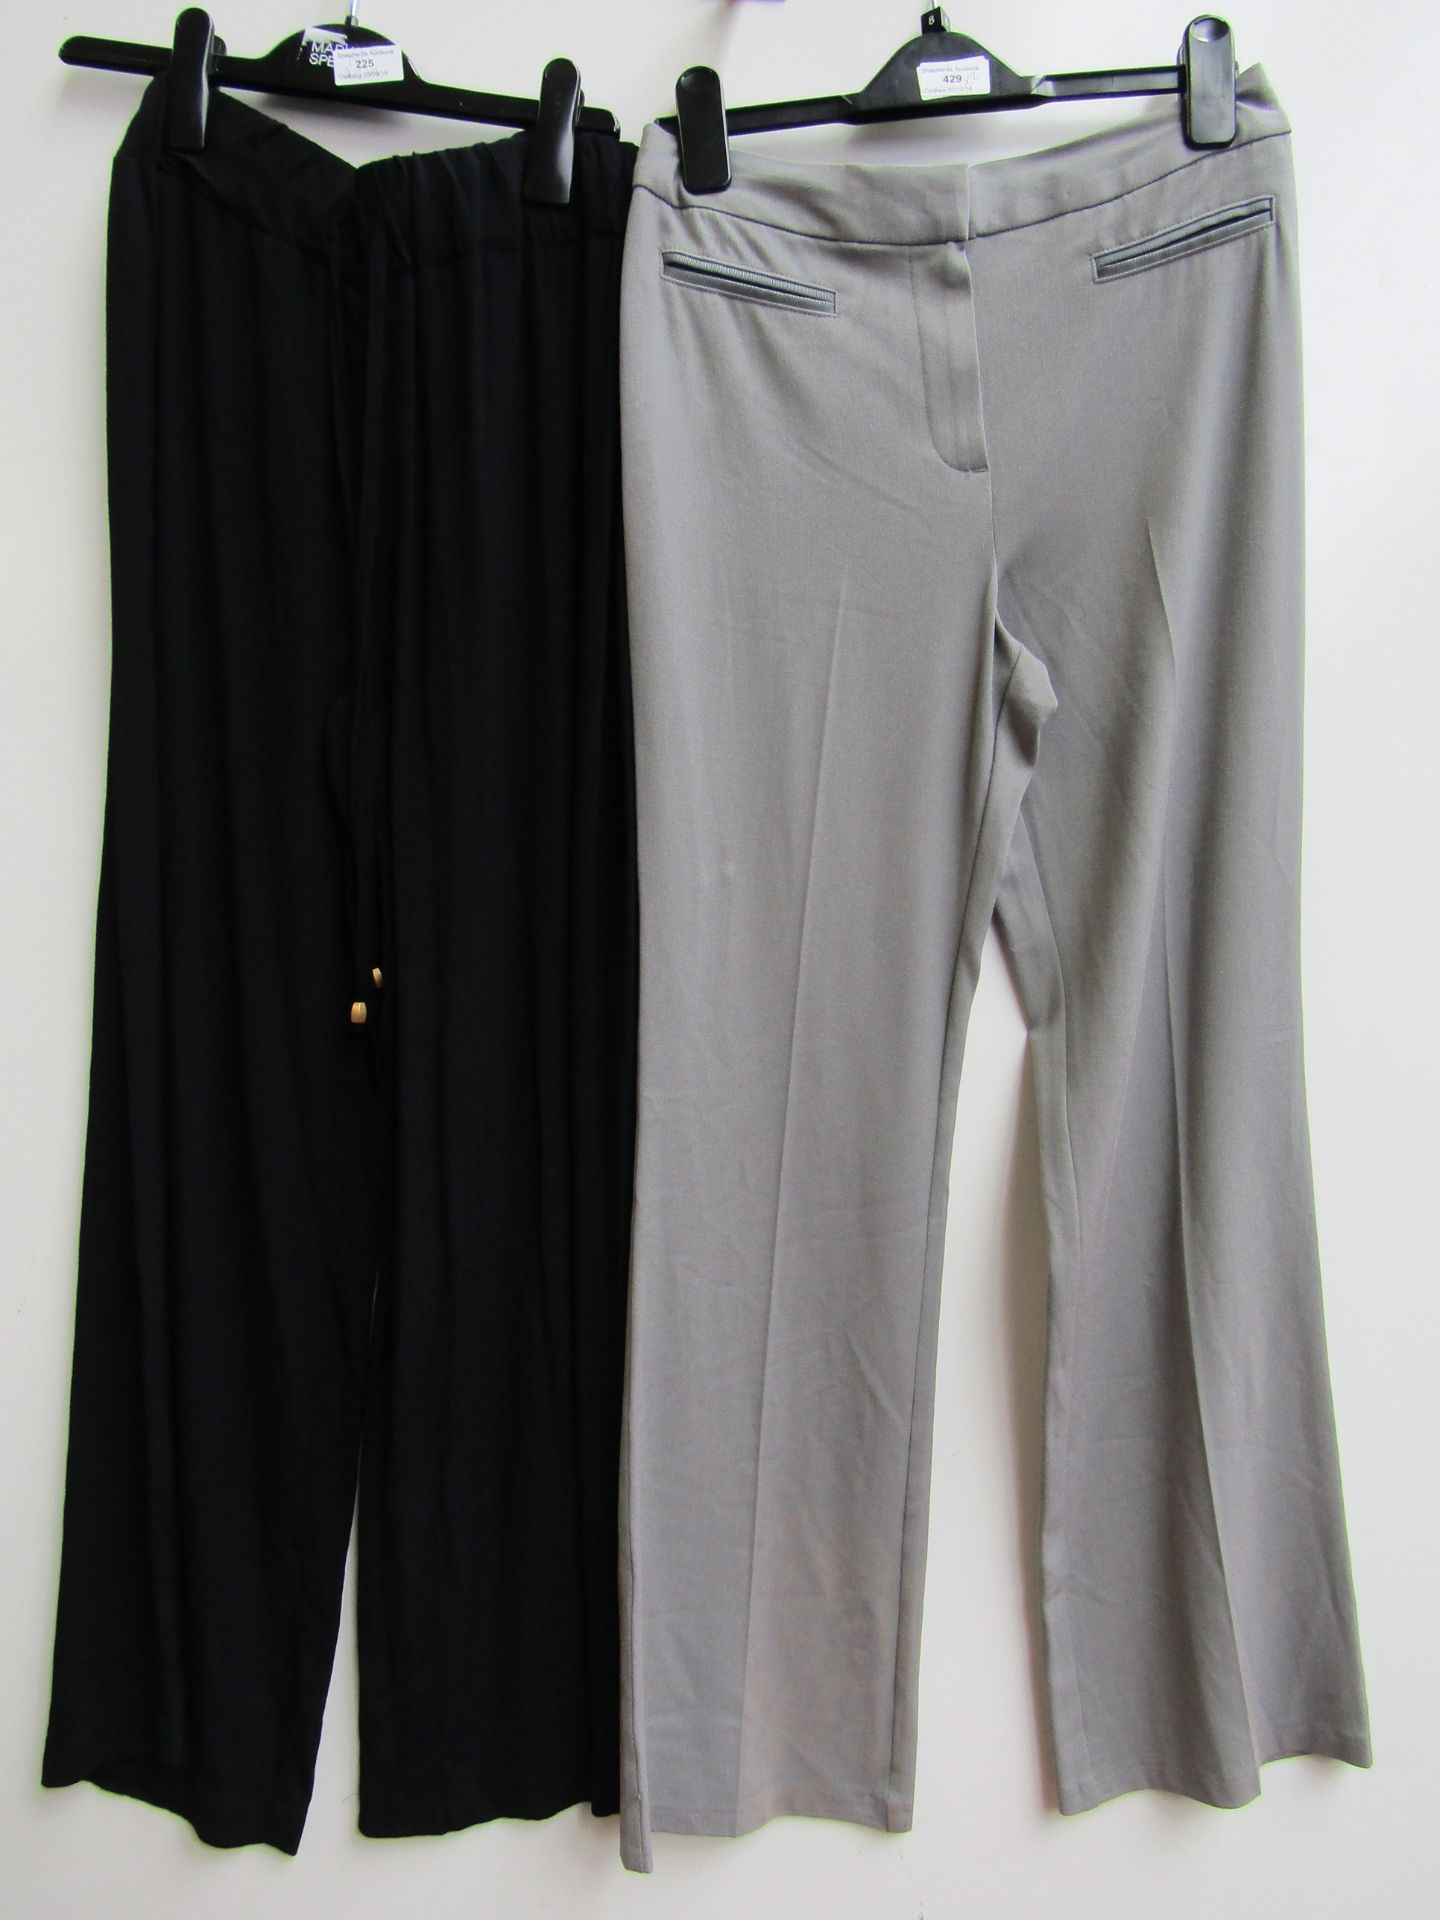 2x Pairs of M&S Collection Trousers Both Size 8